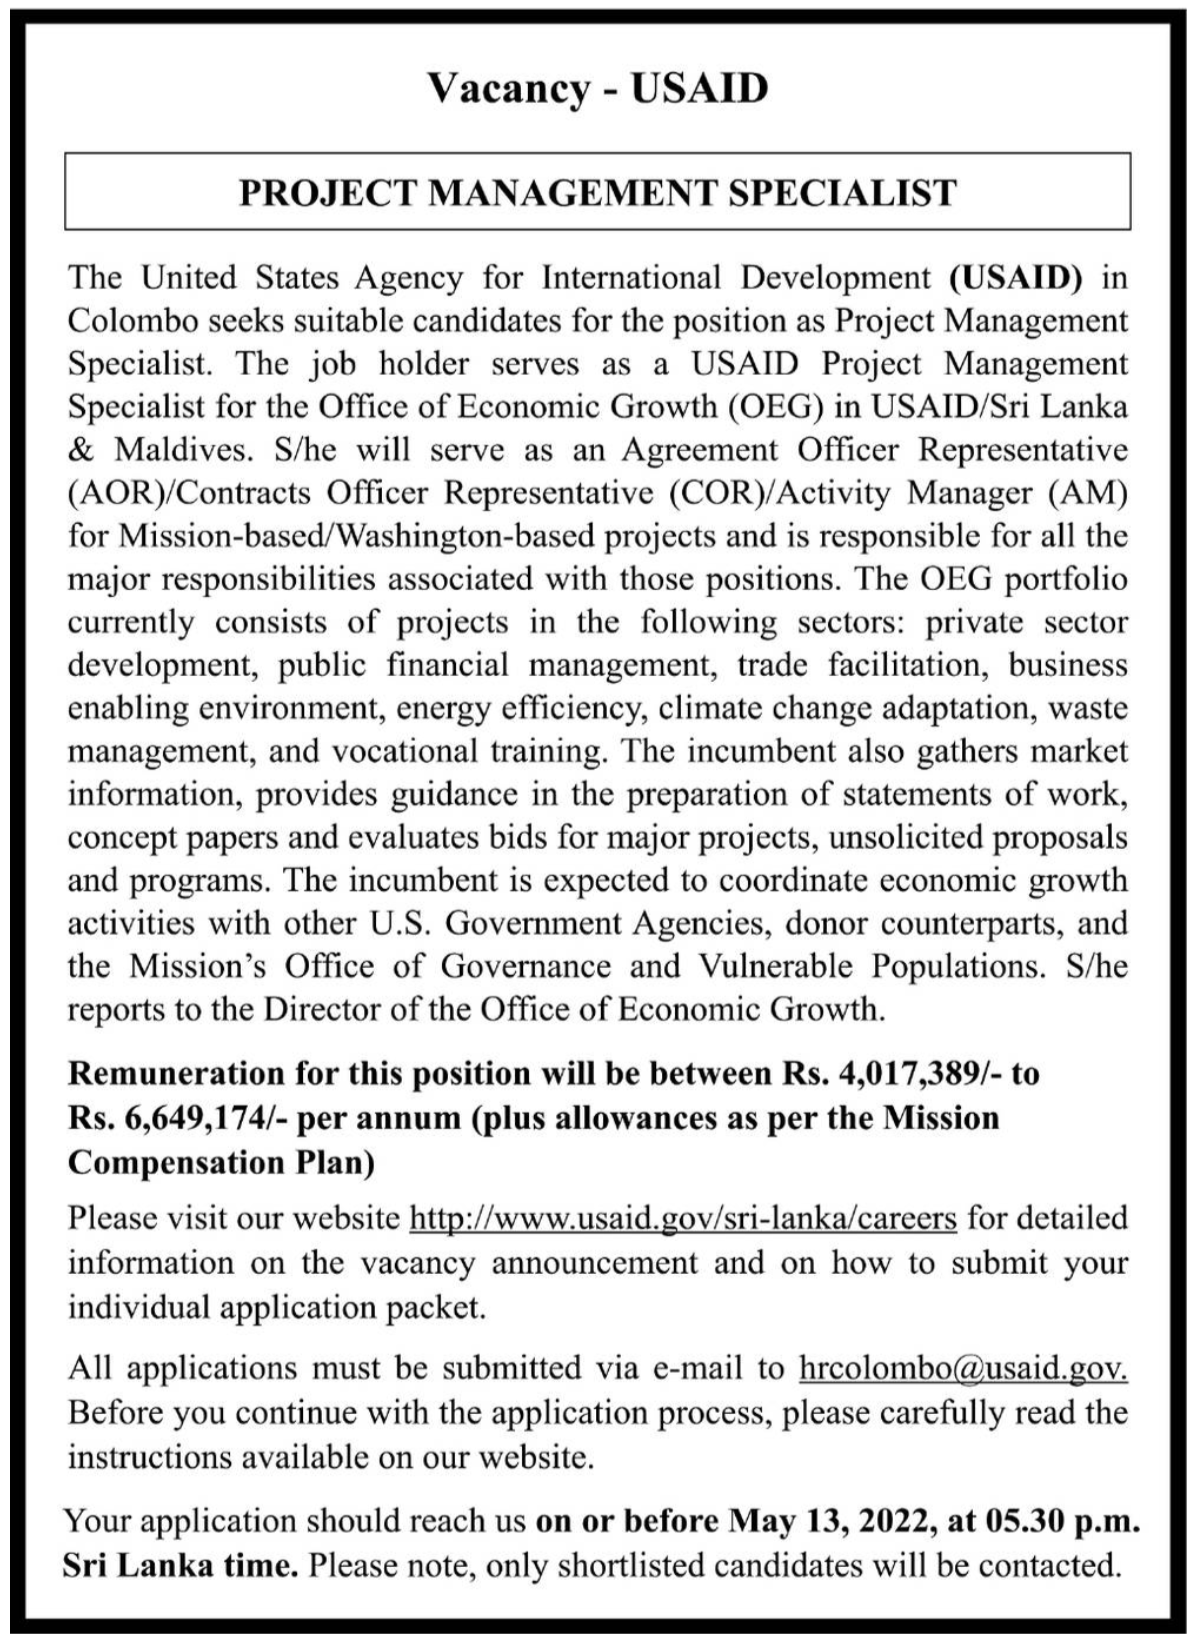 USAID Vacancies 2022 for Project Management Specialist